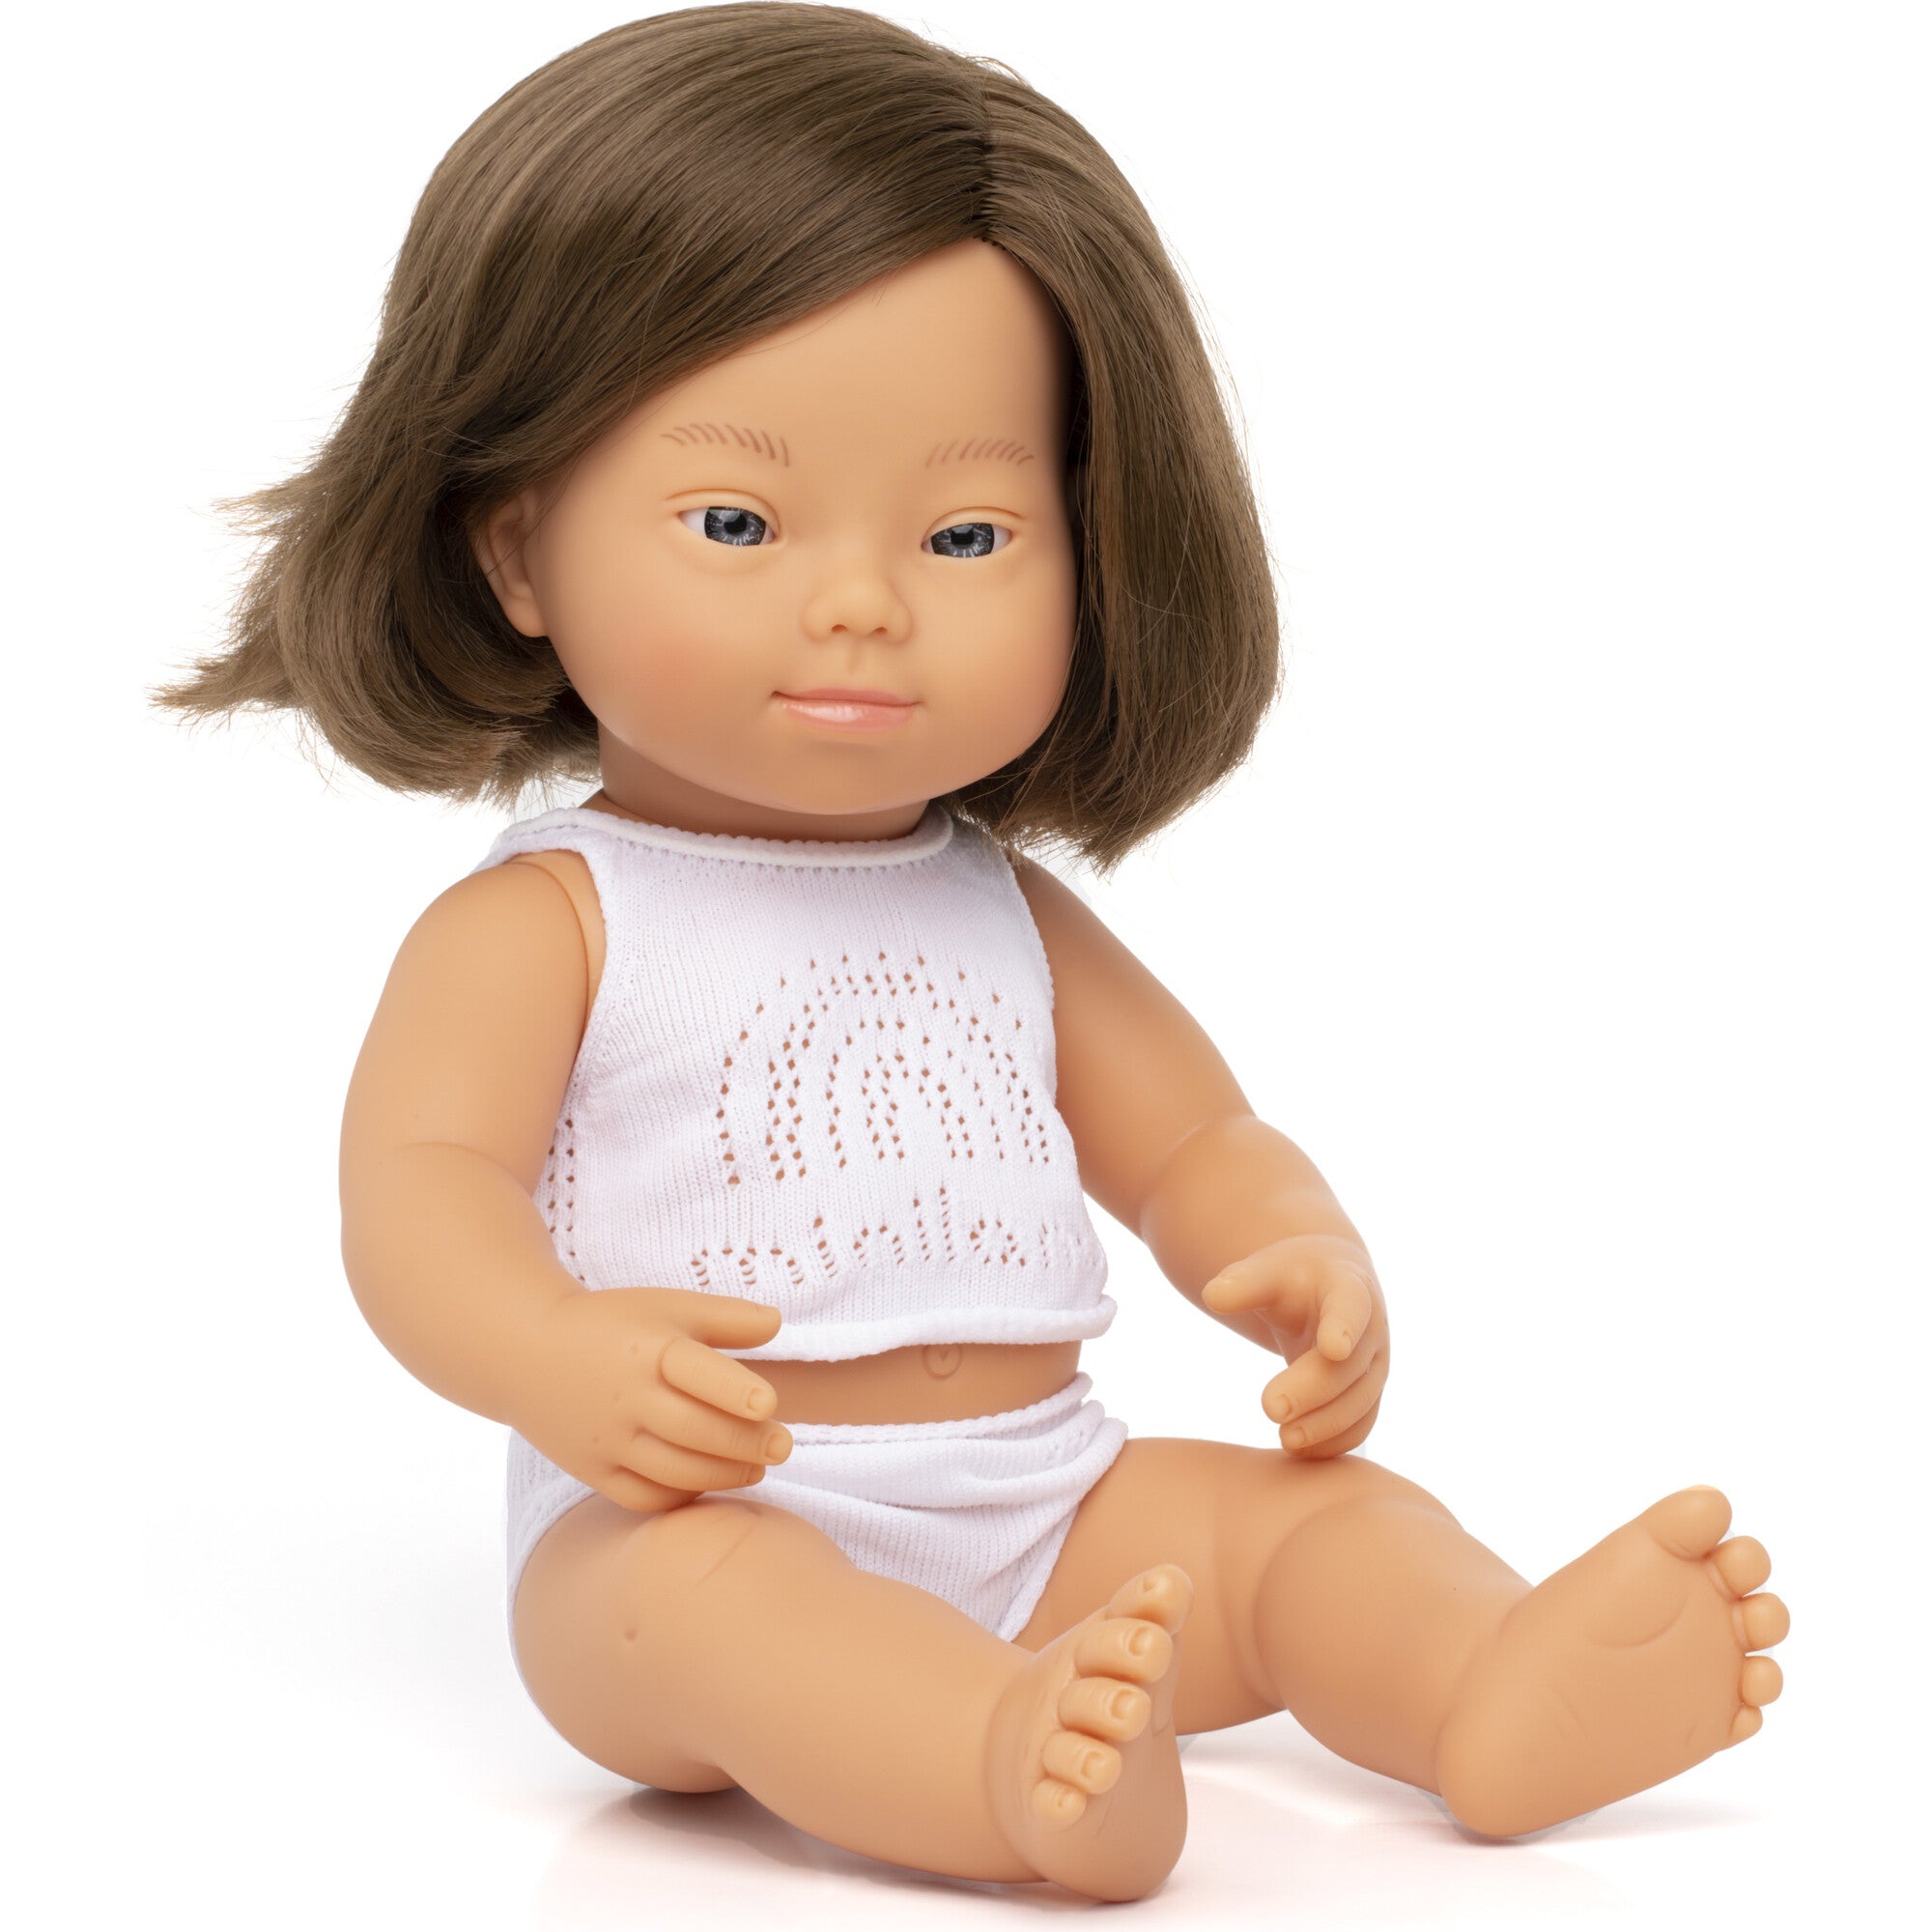 Miniland Baby Doll Caucasian Girl with Down Syndrome 15" Dolls